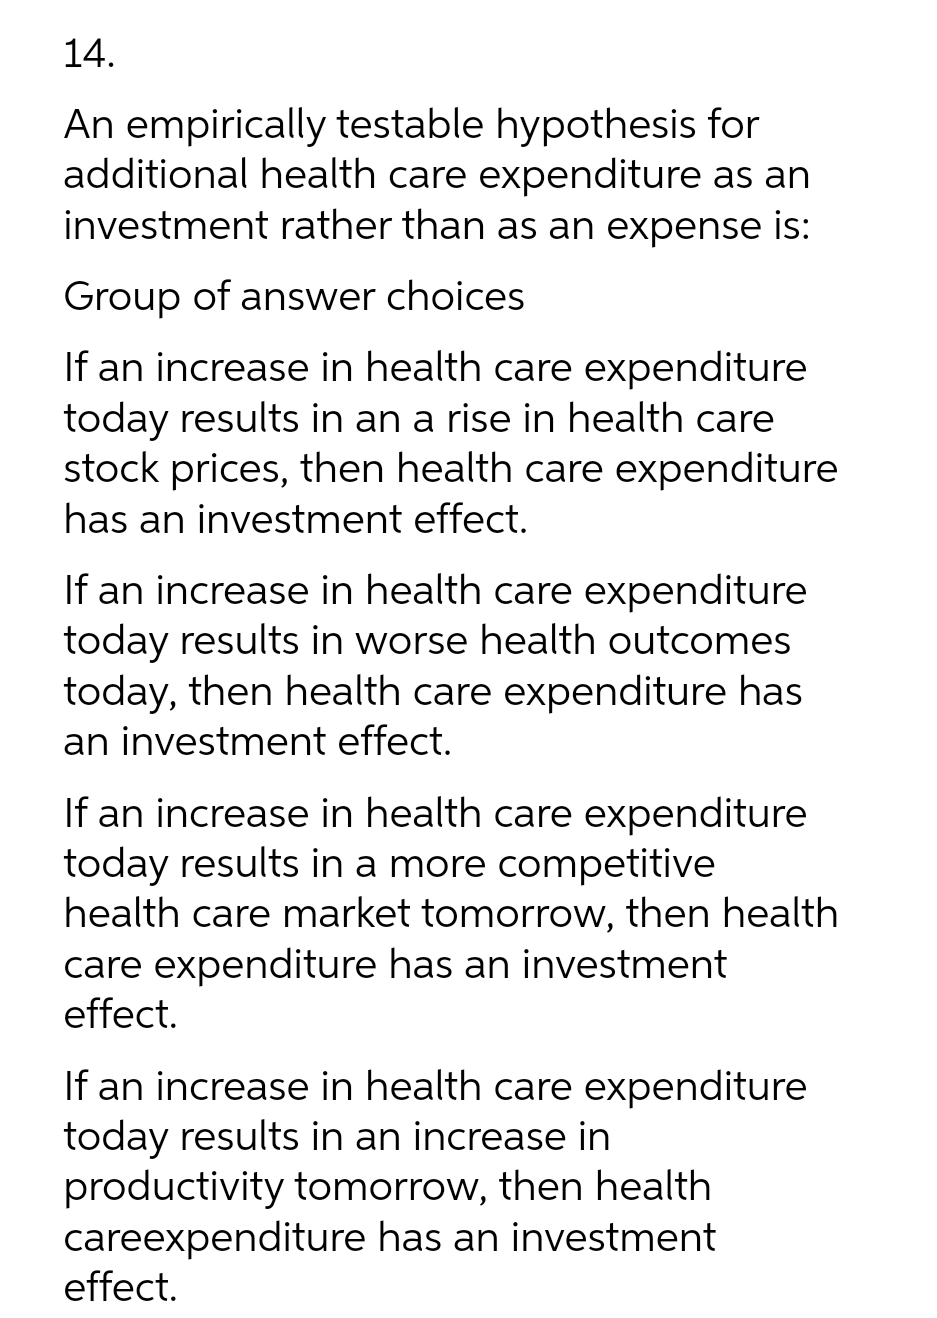 14.
An empirically testable hypothesis for
additional health care expenditure as an
investment rather than as an expense is:
Group of answer choices
If an increase in health care expenditure
today results in an a rise in health care
stock prices, then health care expenditure
has an investment effect.
If an increase in health care expenditure
today results in worse health outcomes
today, then health care expenditure has
an investment effect.
If an increase in health care expenditure
today results in a more competitive
health care market tomorrow, then health
care expenditure has an investment
effect.
If an increase in health care expenditure
today results in an increase in
productivity tomorrow, then health
careexpenditure has an investment
effect.
